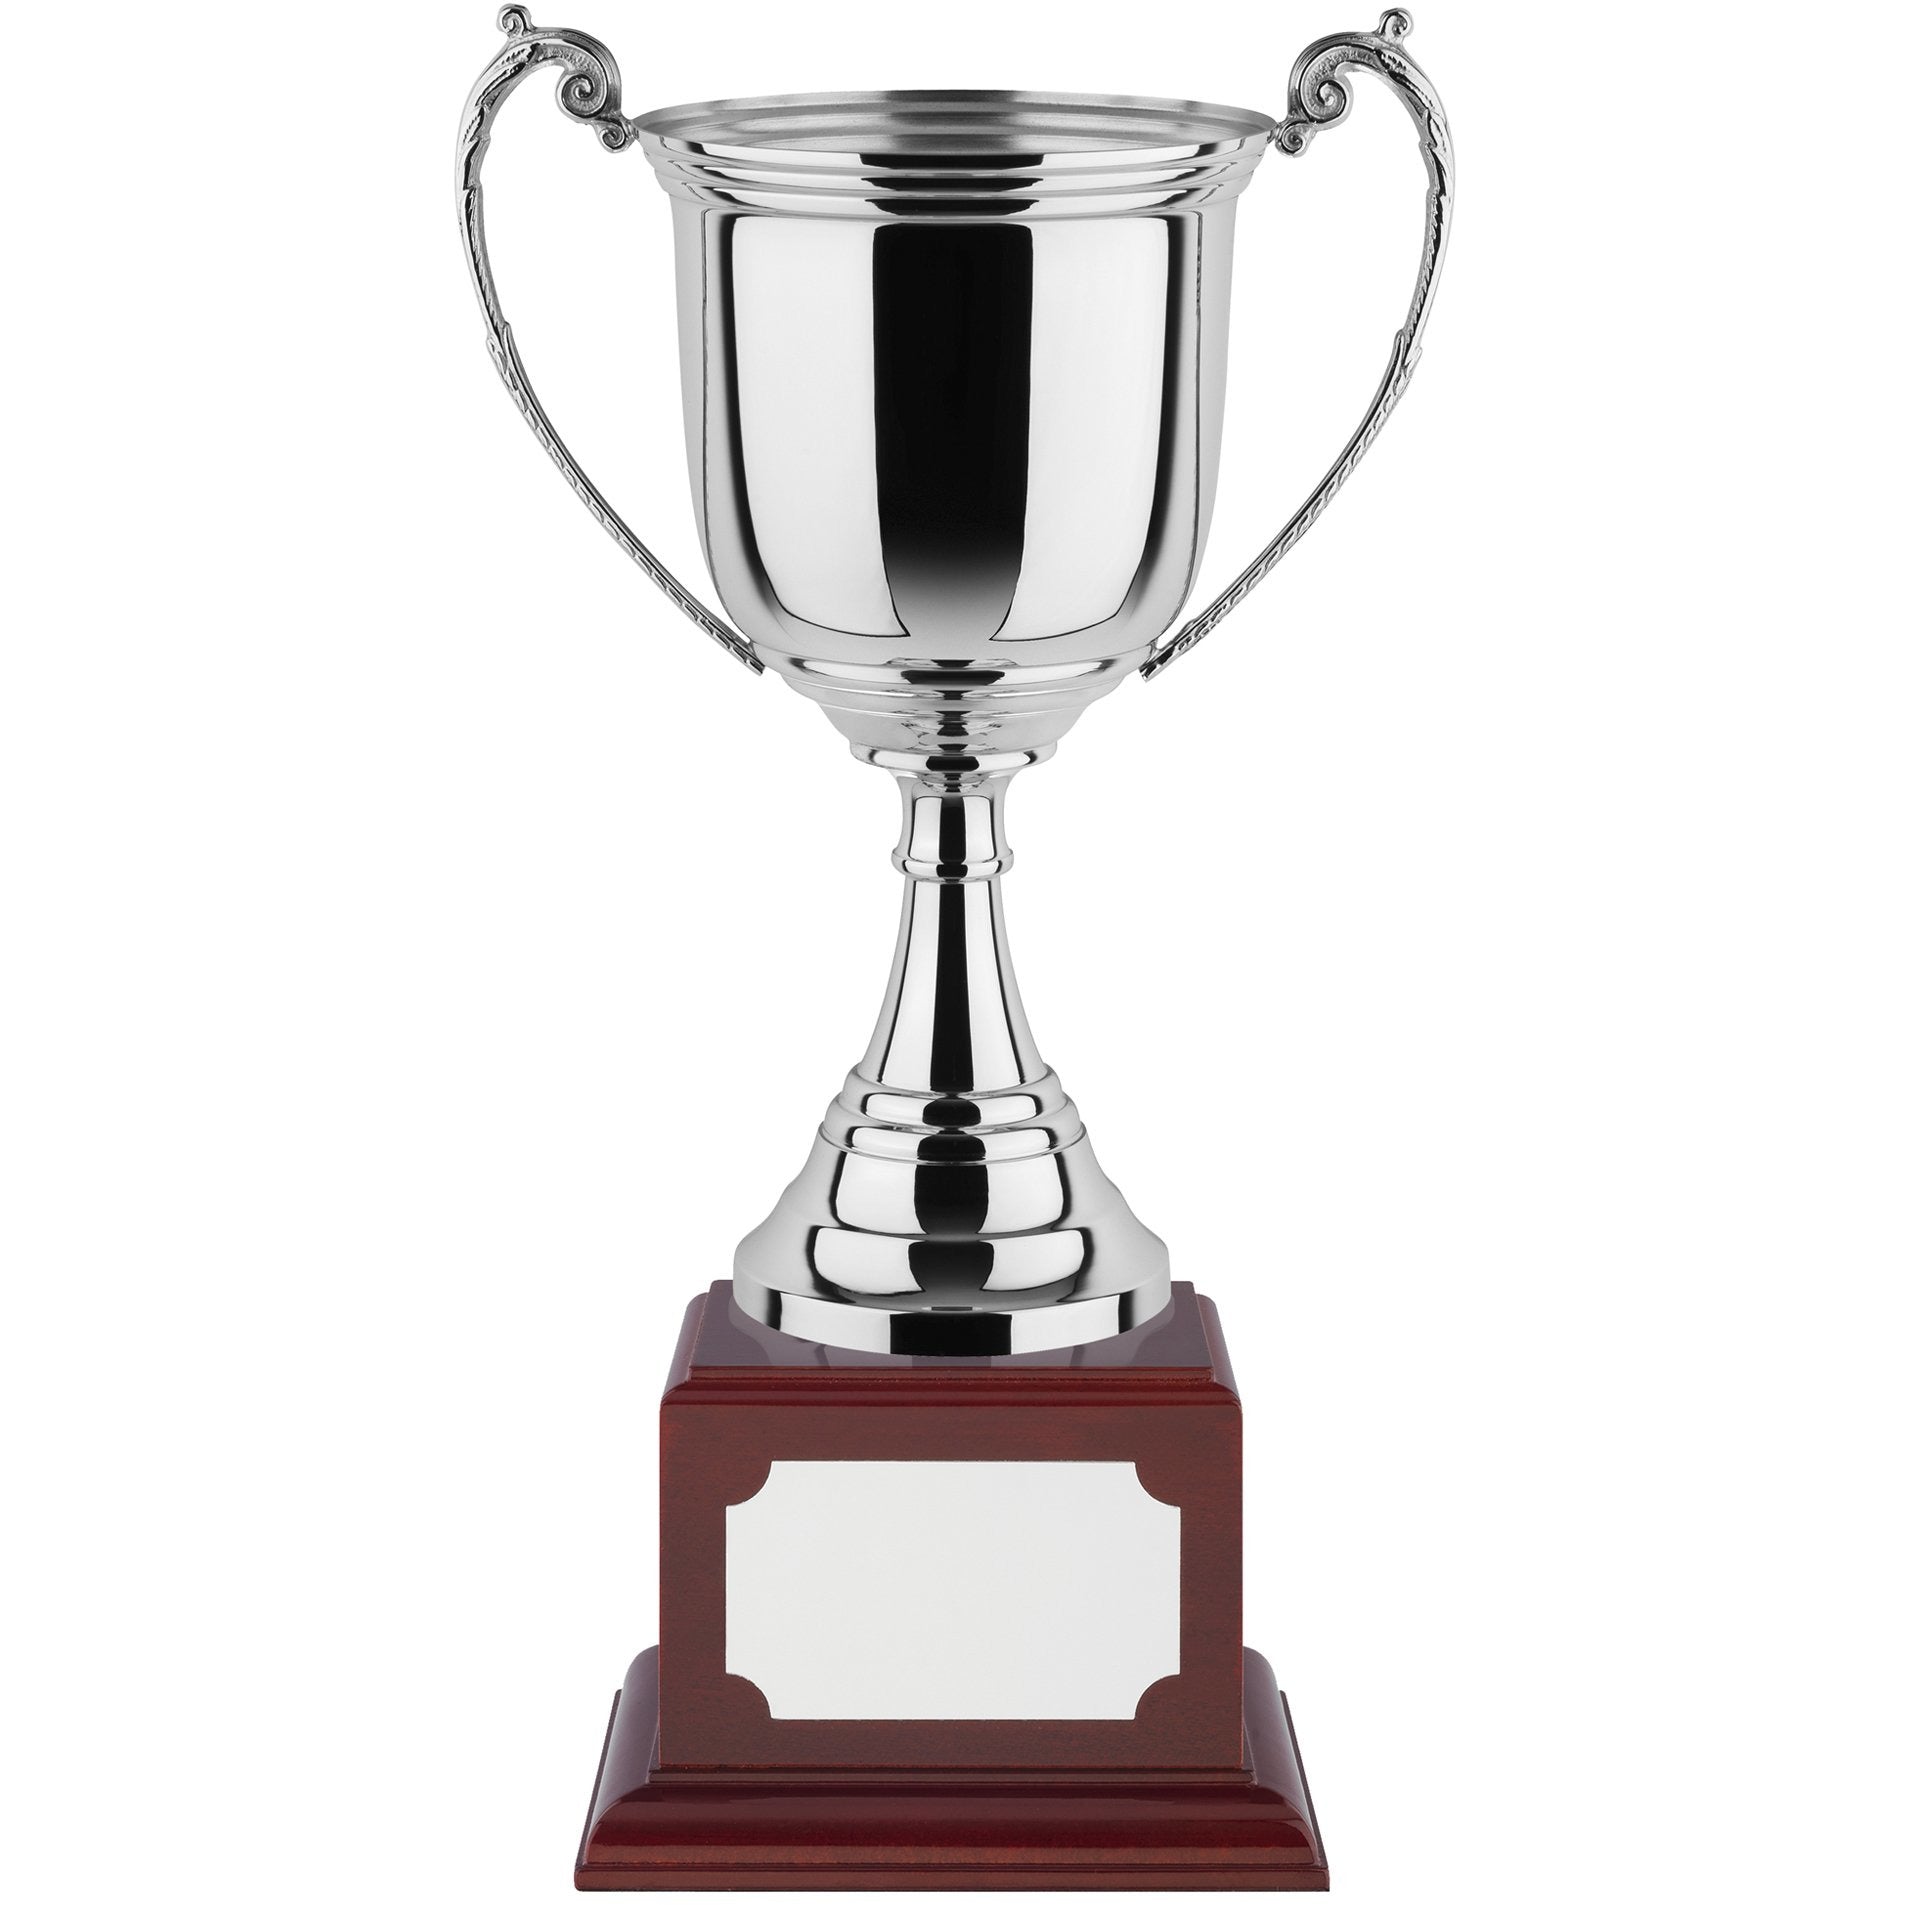 5 Series Revolution Trophy Cup on Square Rosewood Base